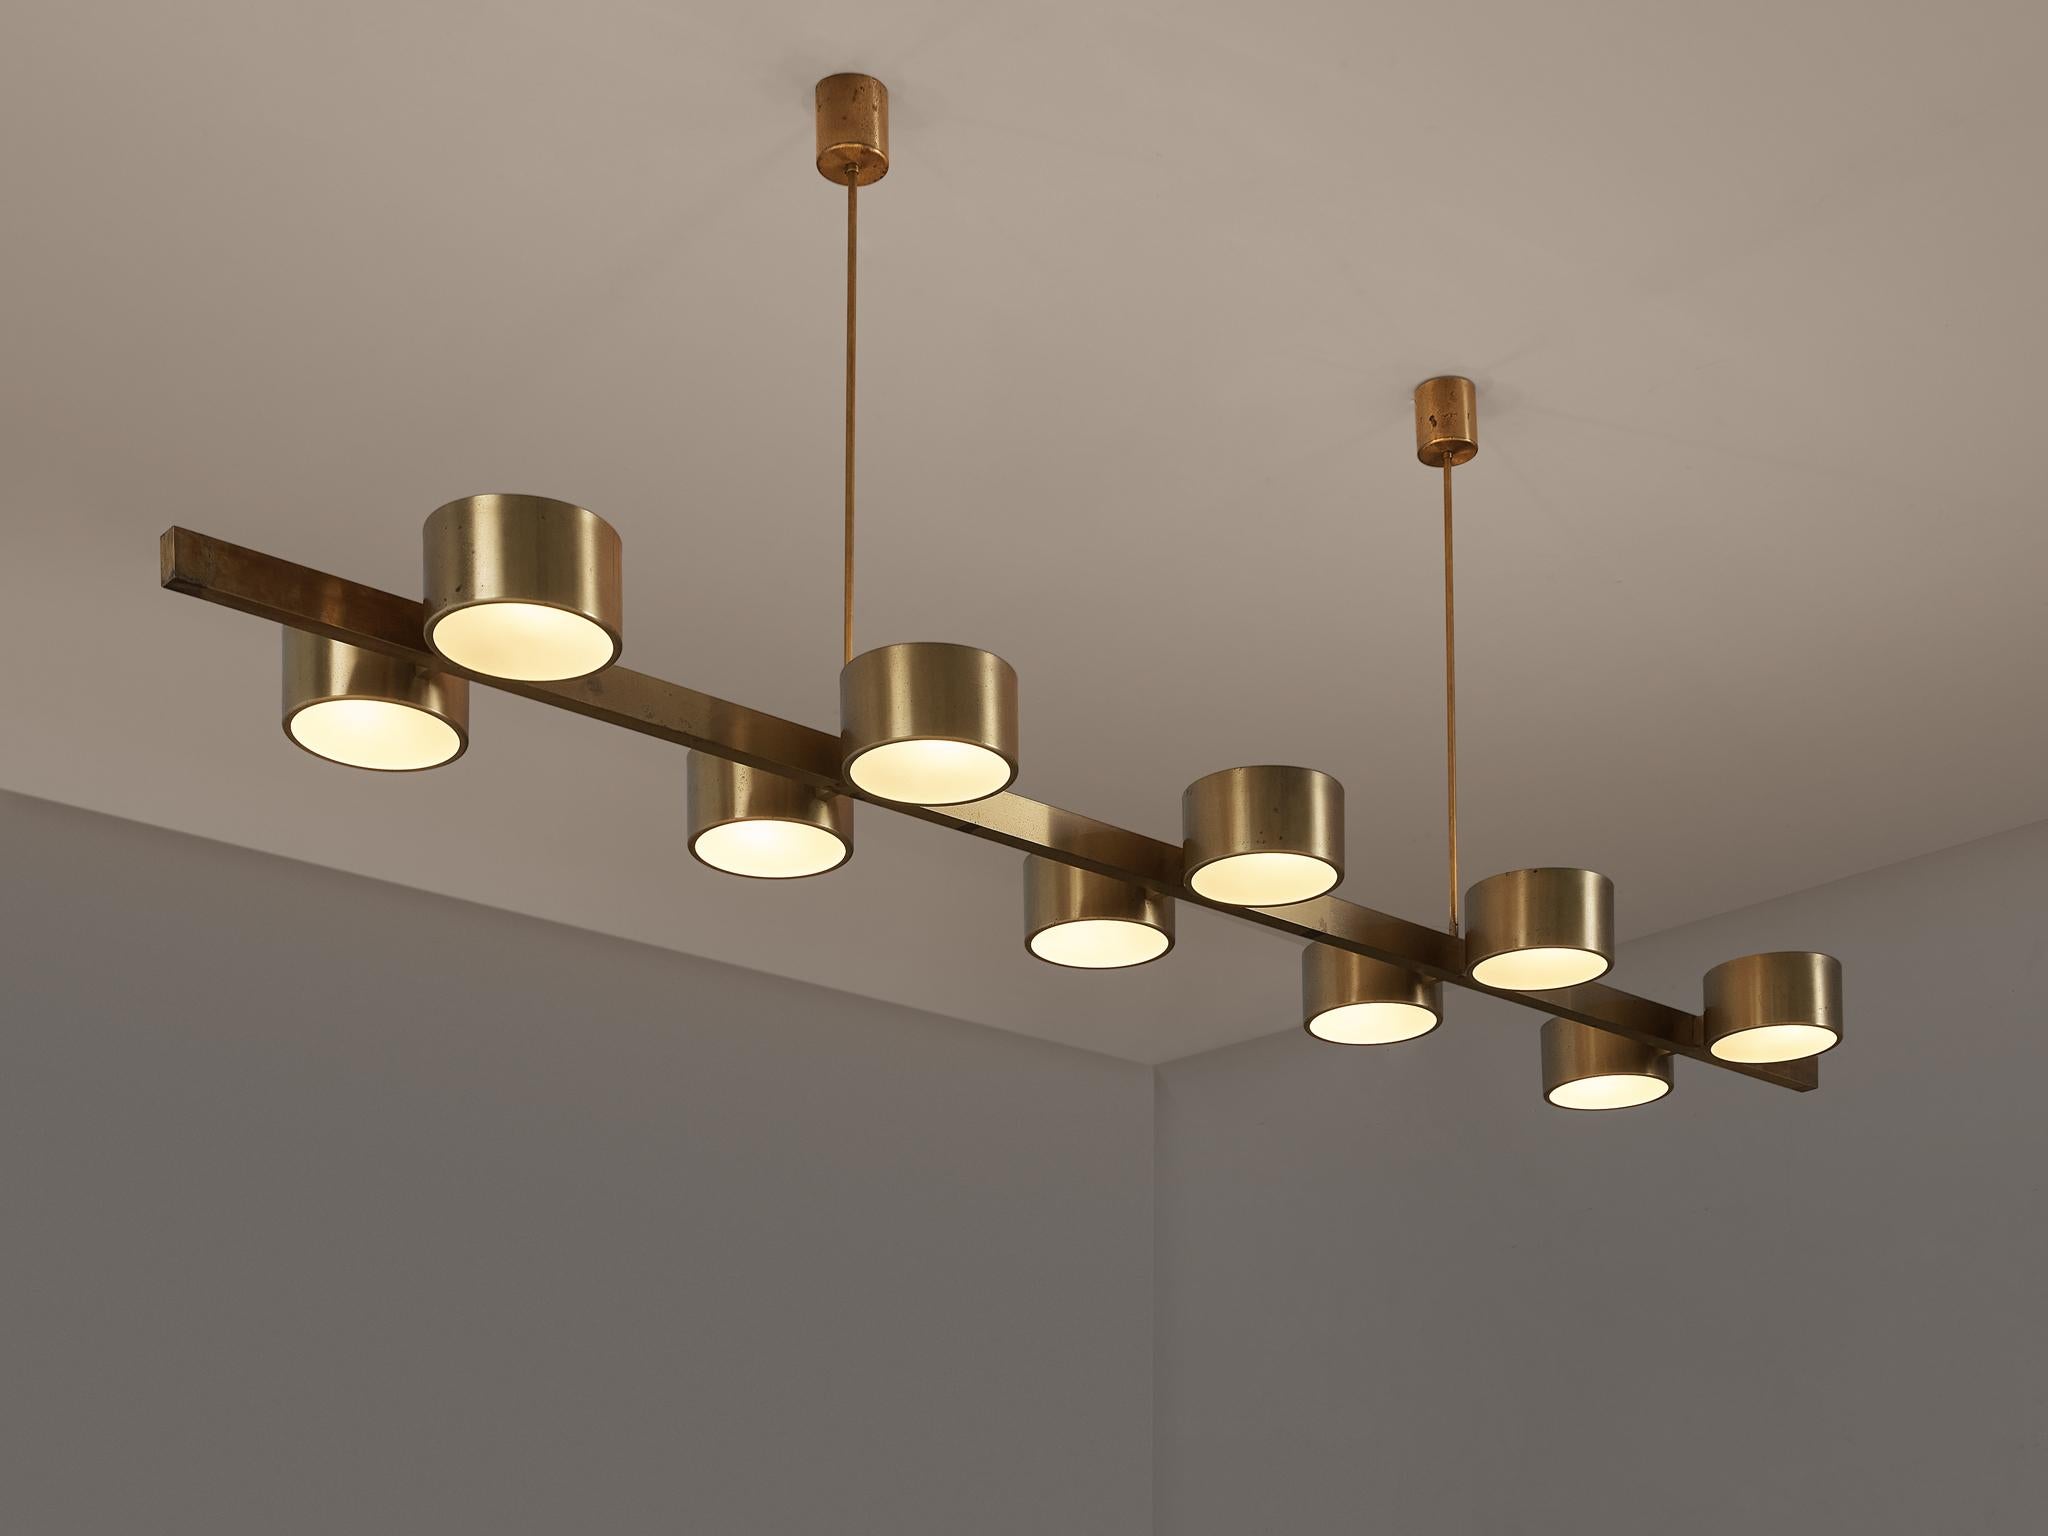 Hans-Agne Jakobsson, produced in Markaryd, ceiling light, 'model T 261/10', brass, frosted glass, Sweden, 1960s measures: 8.5 ft. 

Hans-Agne Jakobsson designed this large chandelier with ten cylindrical light shades paired on a line. The brass